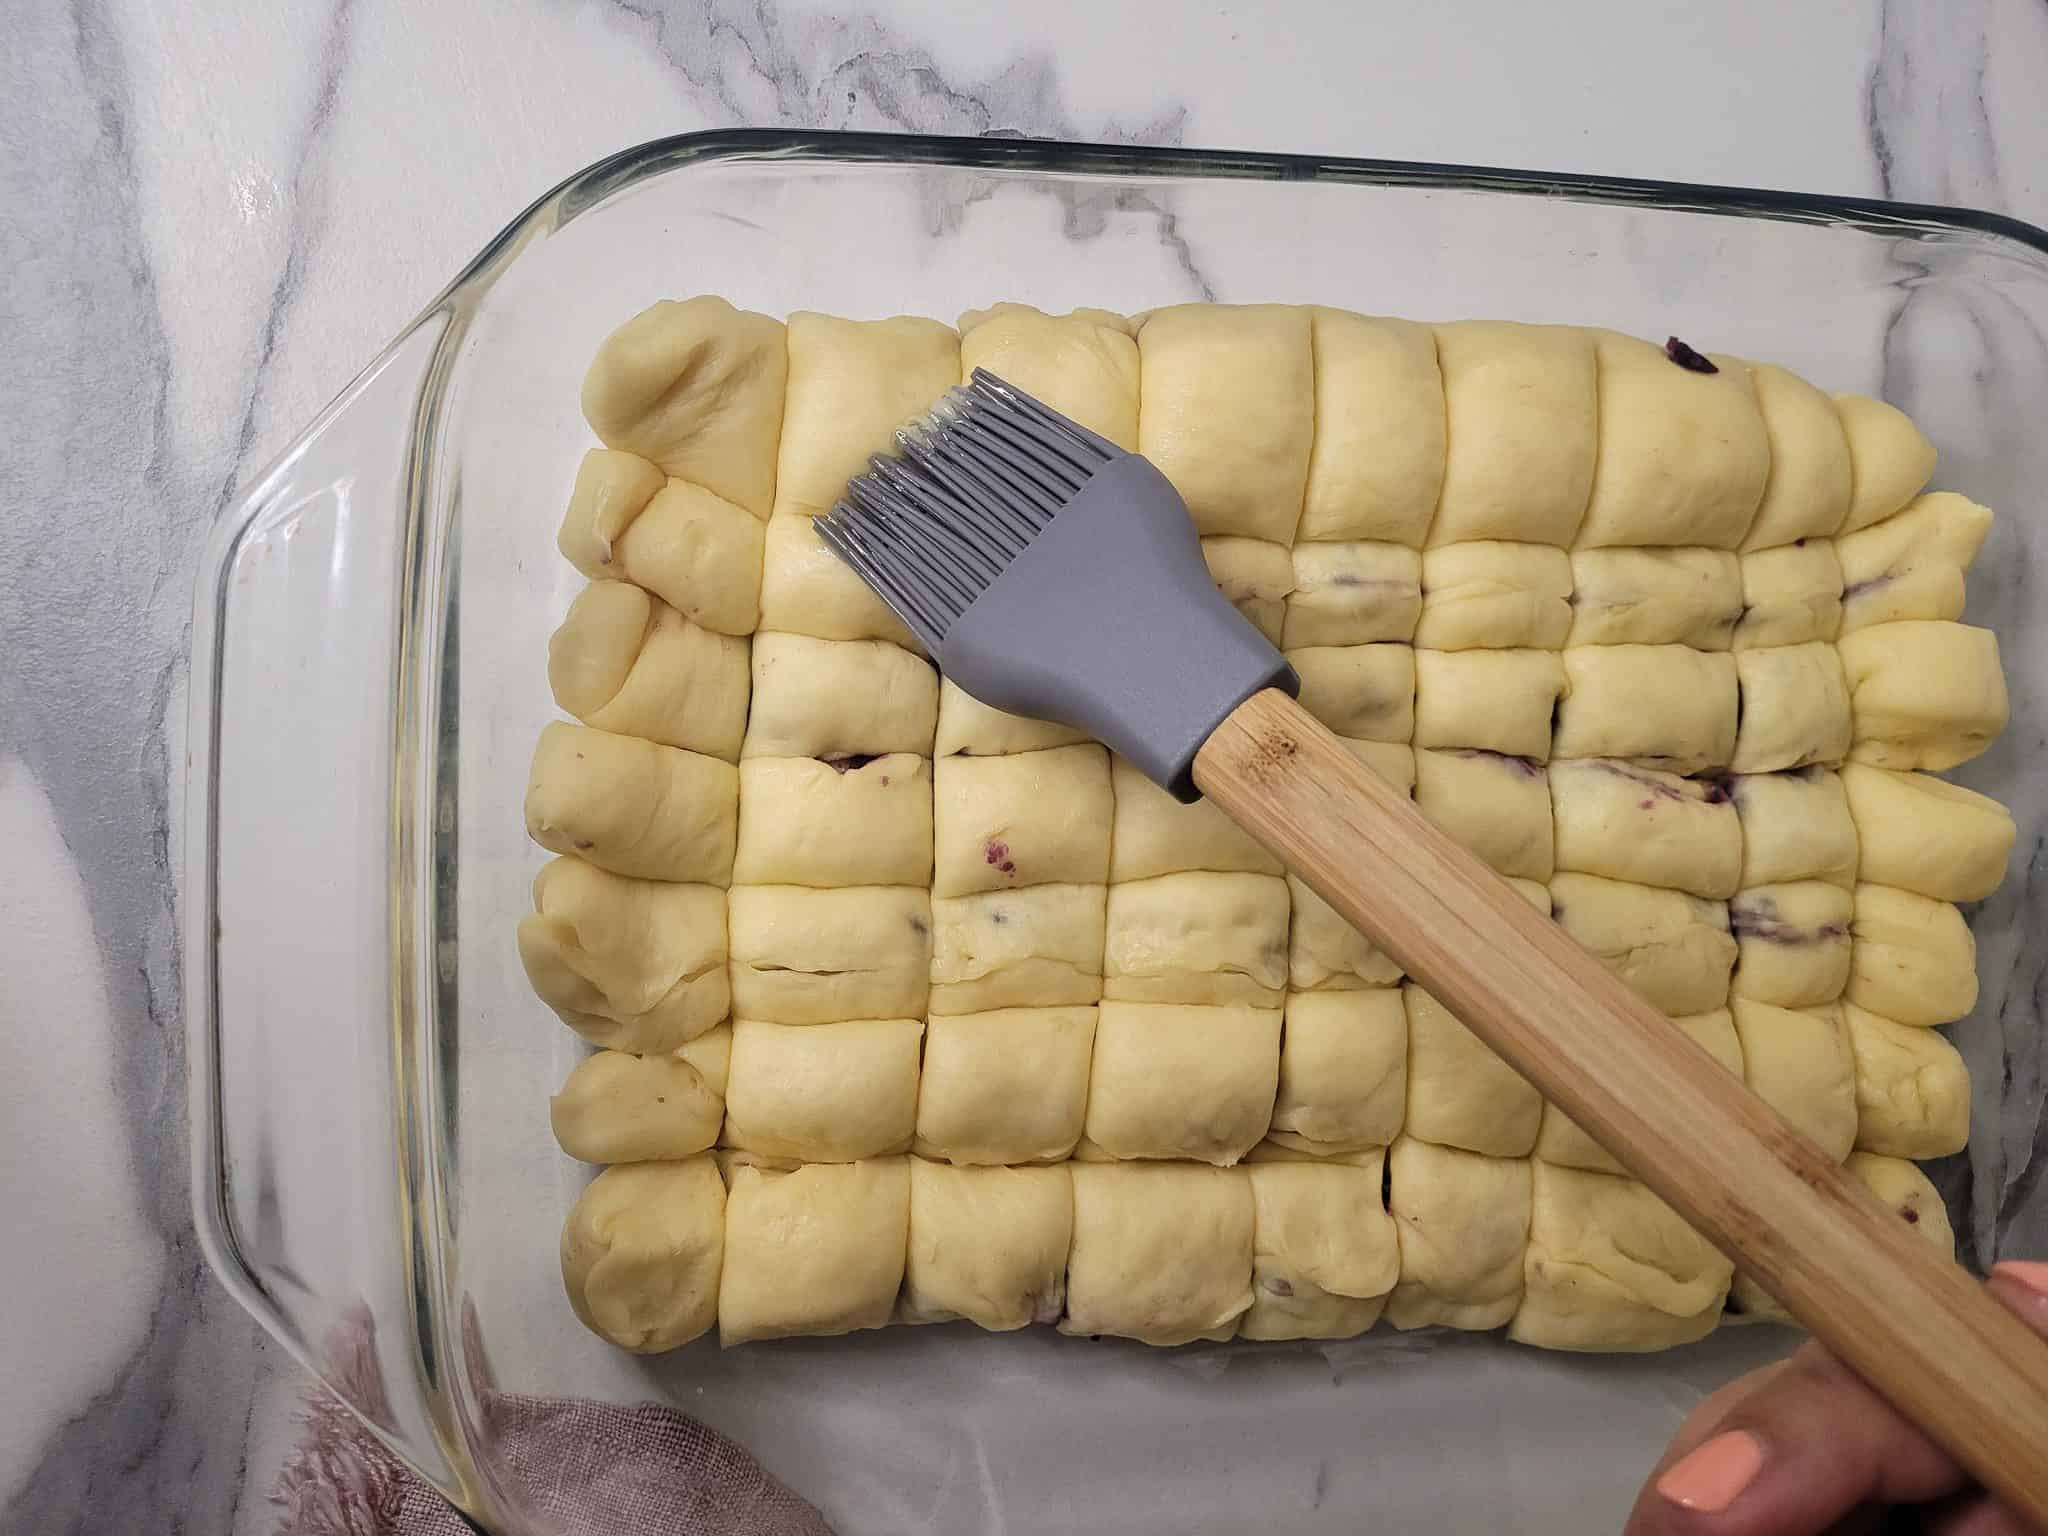 Silicone brush with leavened bread dough in a glass baking dish